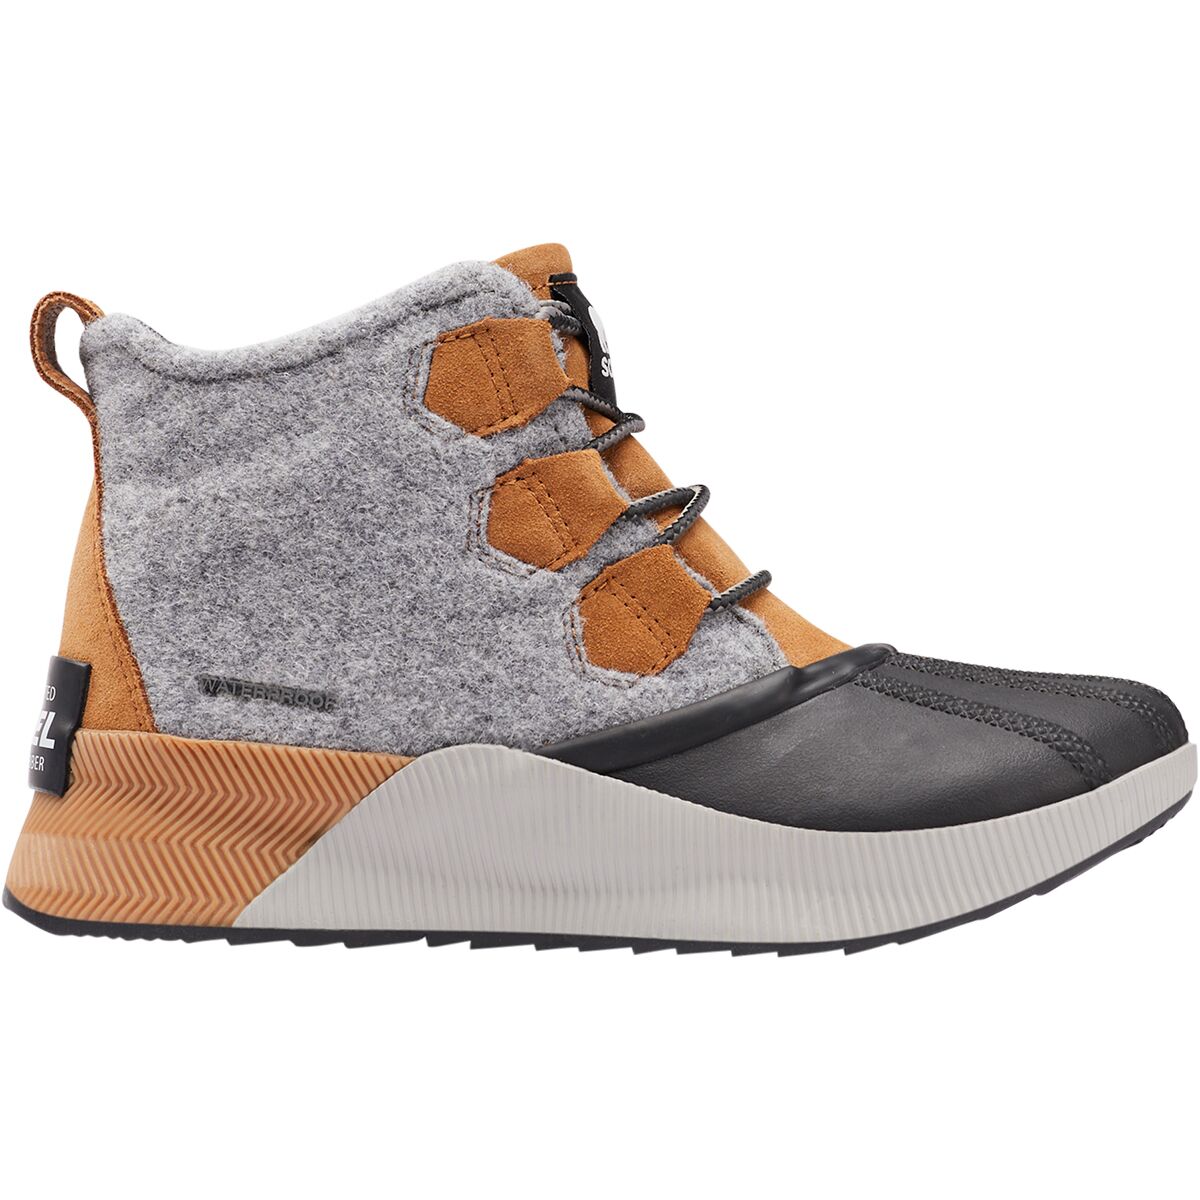 SOREL Out N About III Classic Duck Boot - Women's